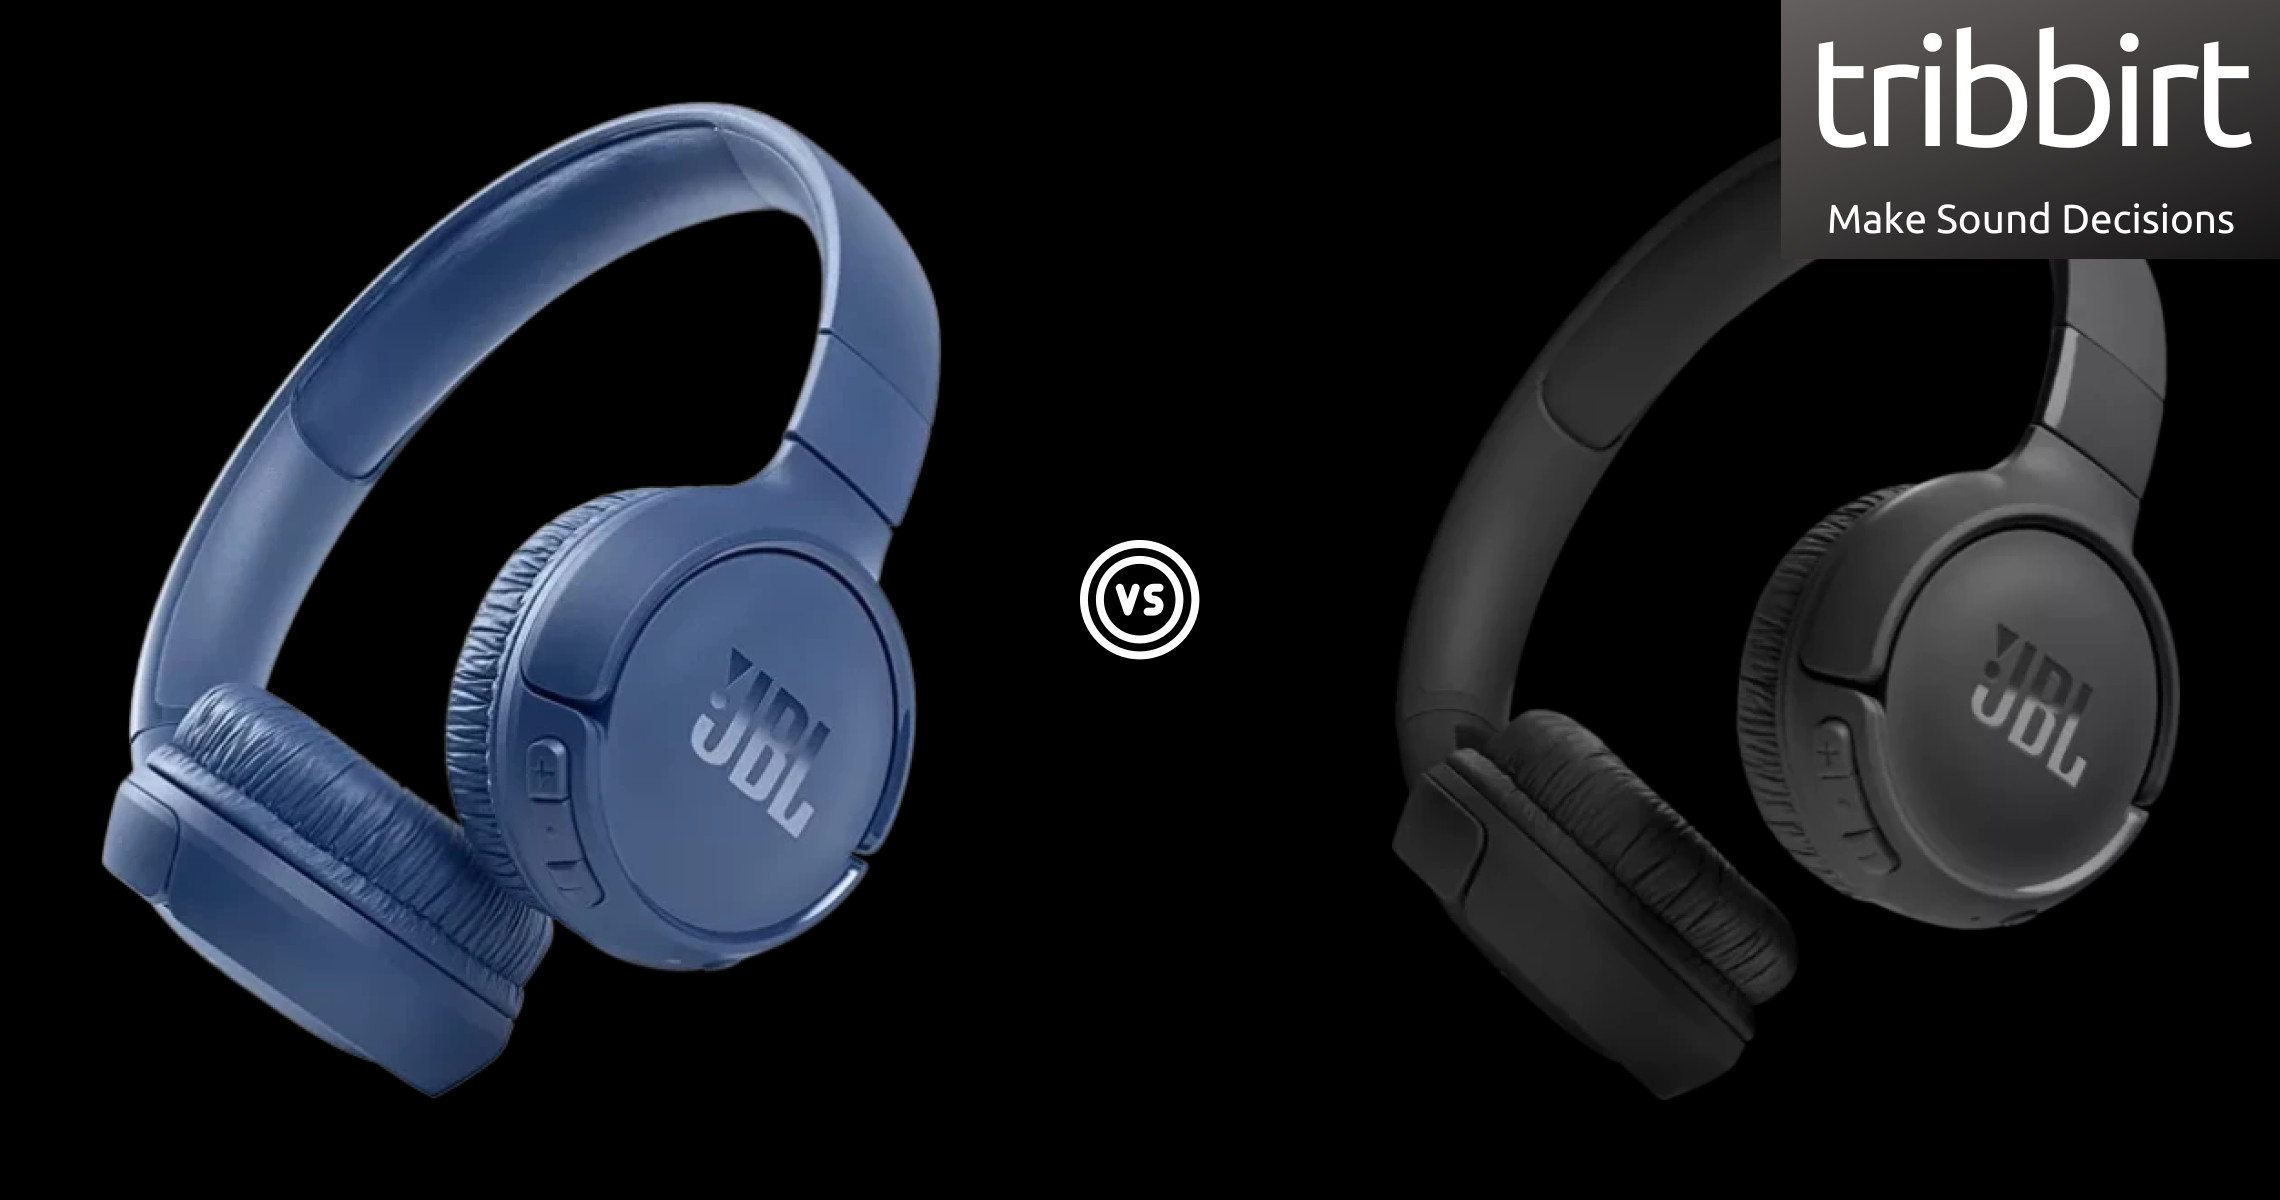 JBL Tune 510BT vs JBL Tune 520BT: What is the difference?